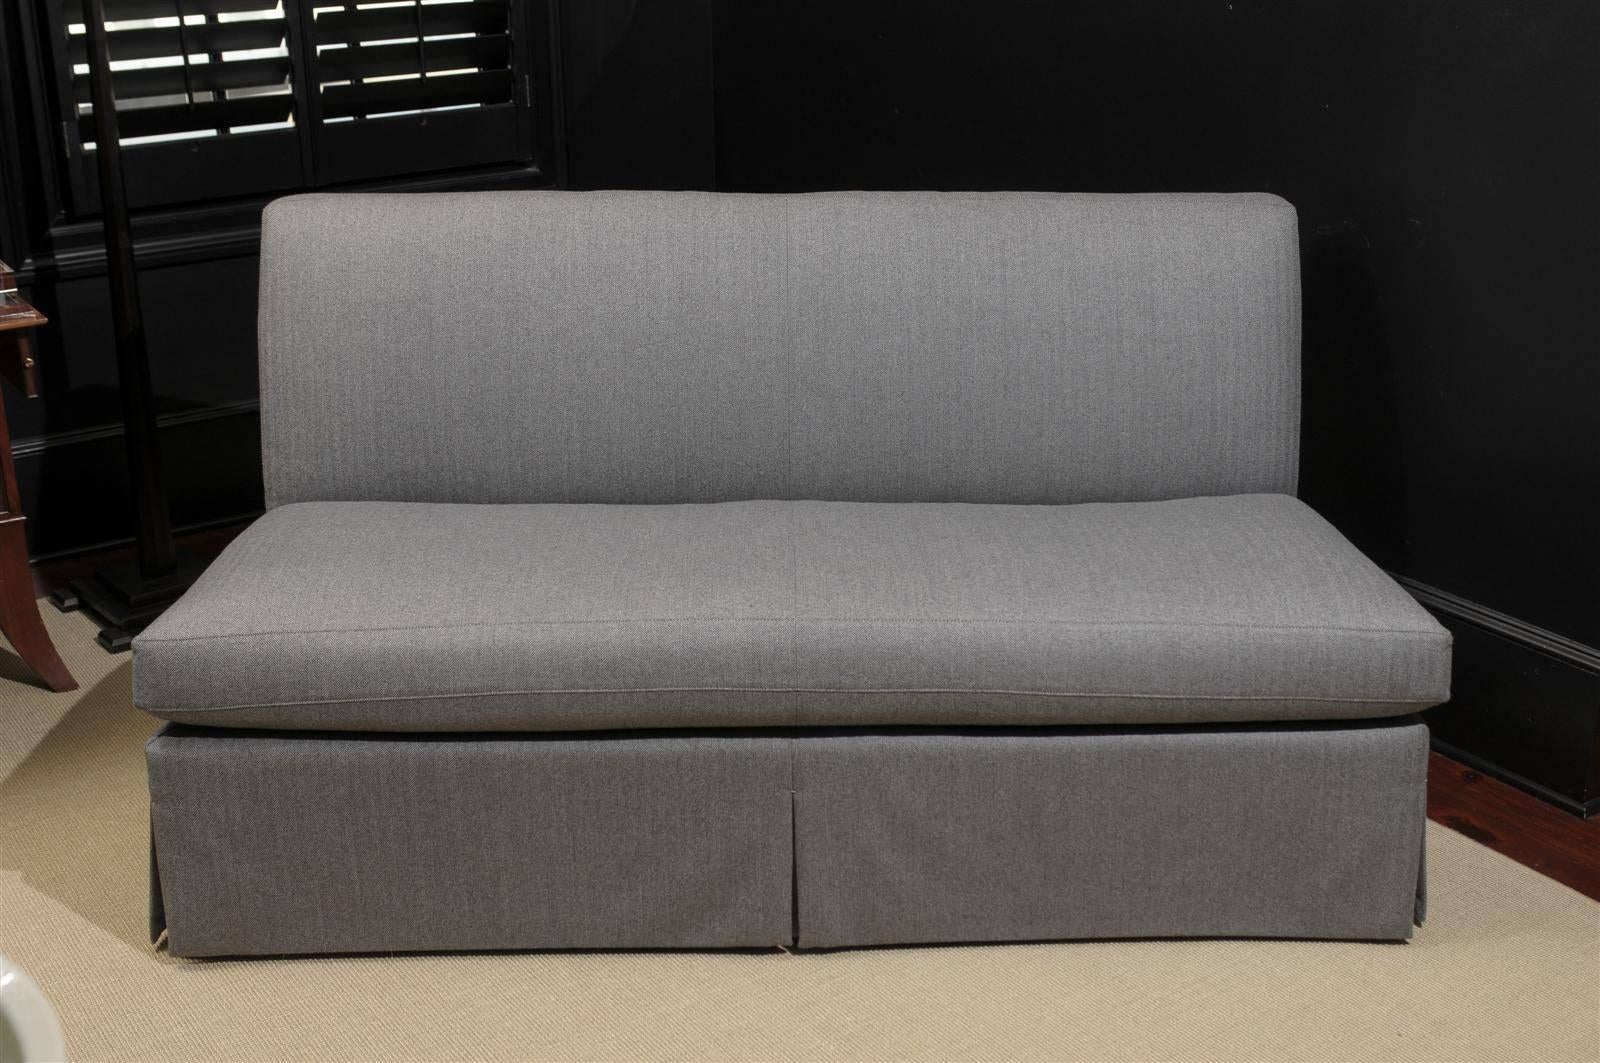 From the Robert Brown Collection, the Macrae Armless Loveseat is upholstered in Holland & Sherry Fabric.
